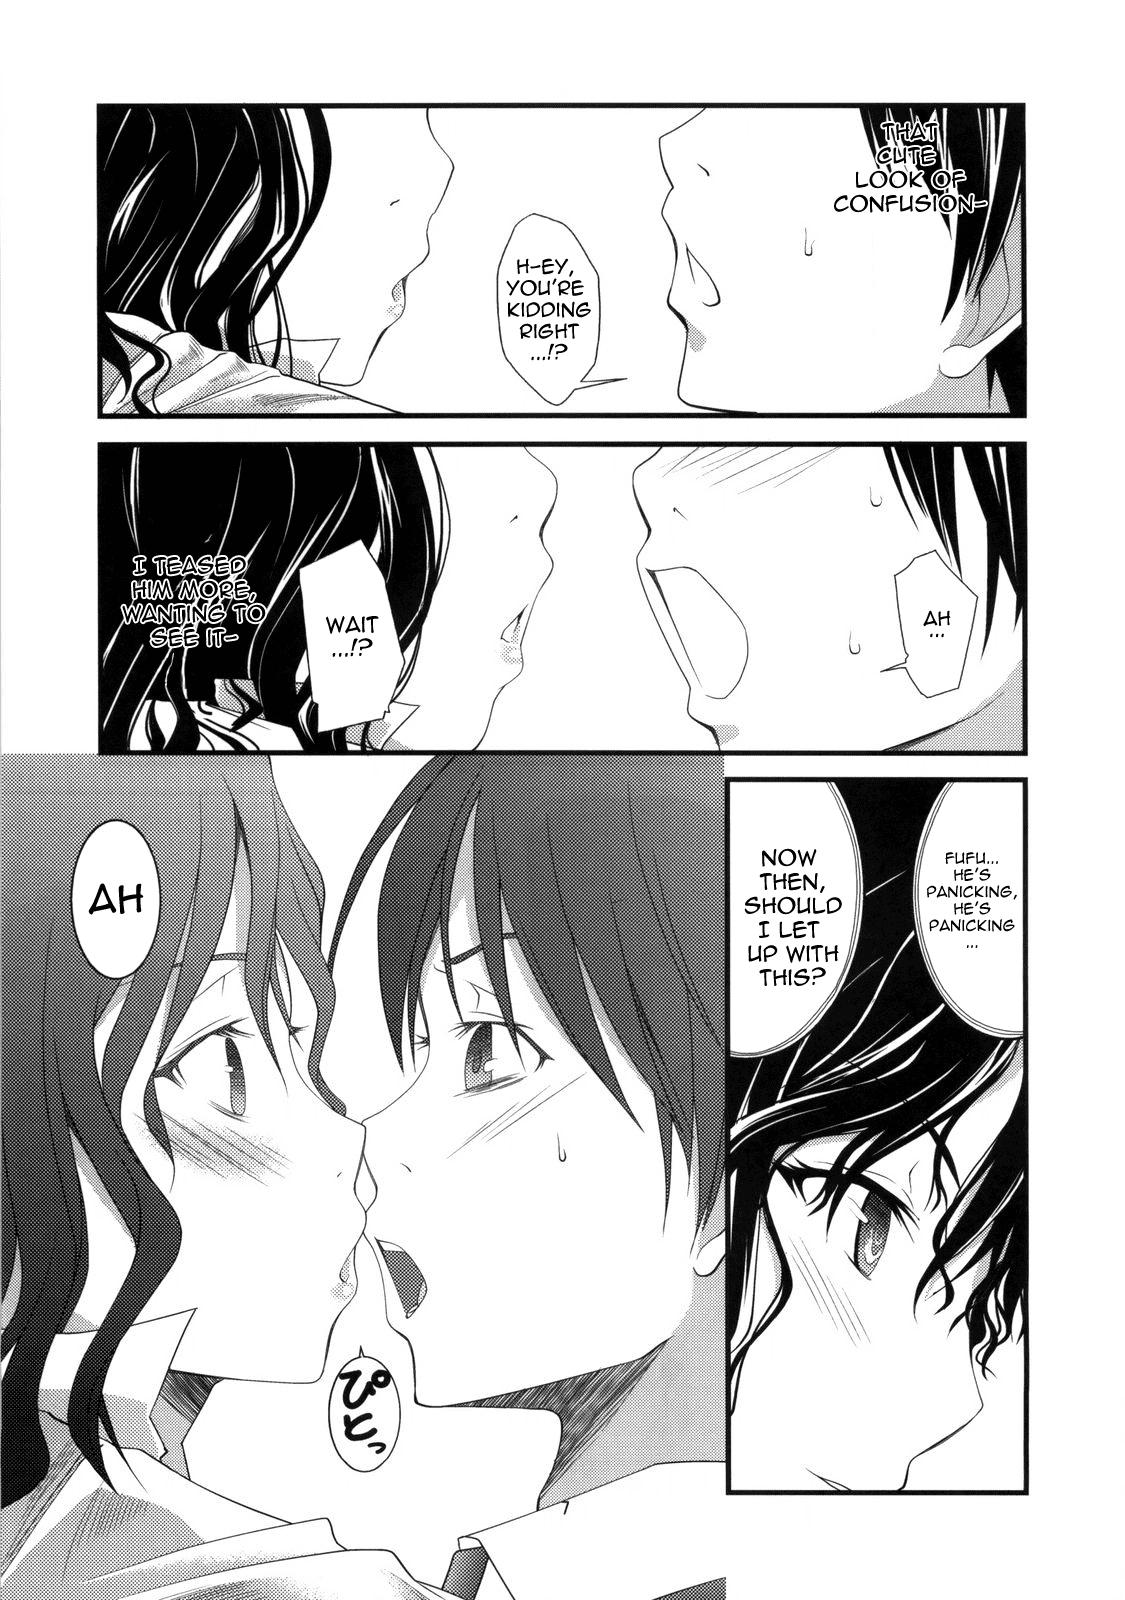 Interracial Hardcore Yesterday & Today - Amagami Rough Porn - Page 6